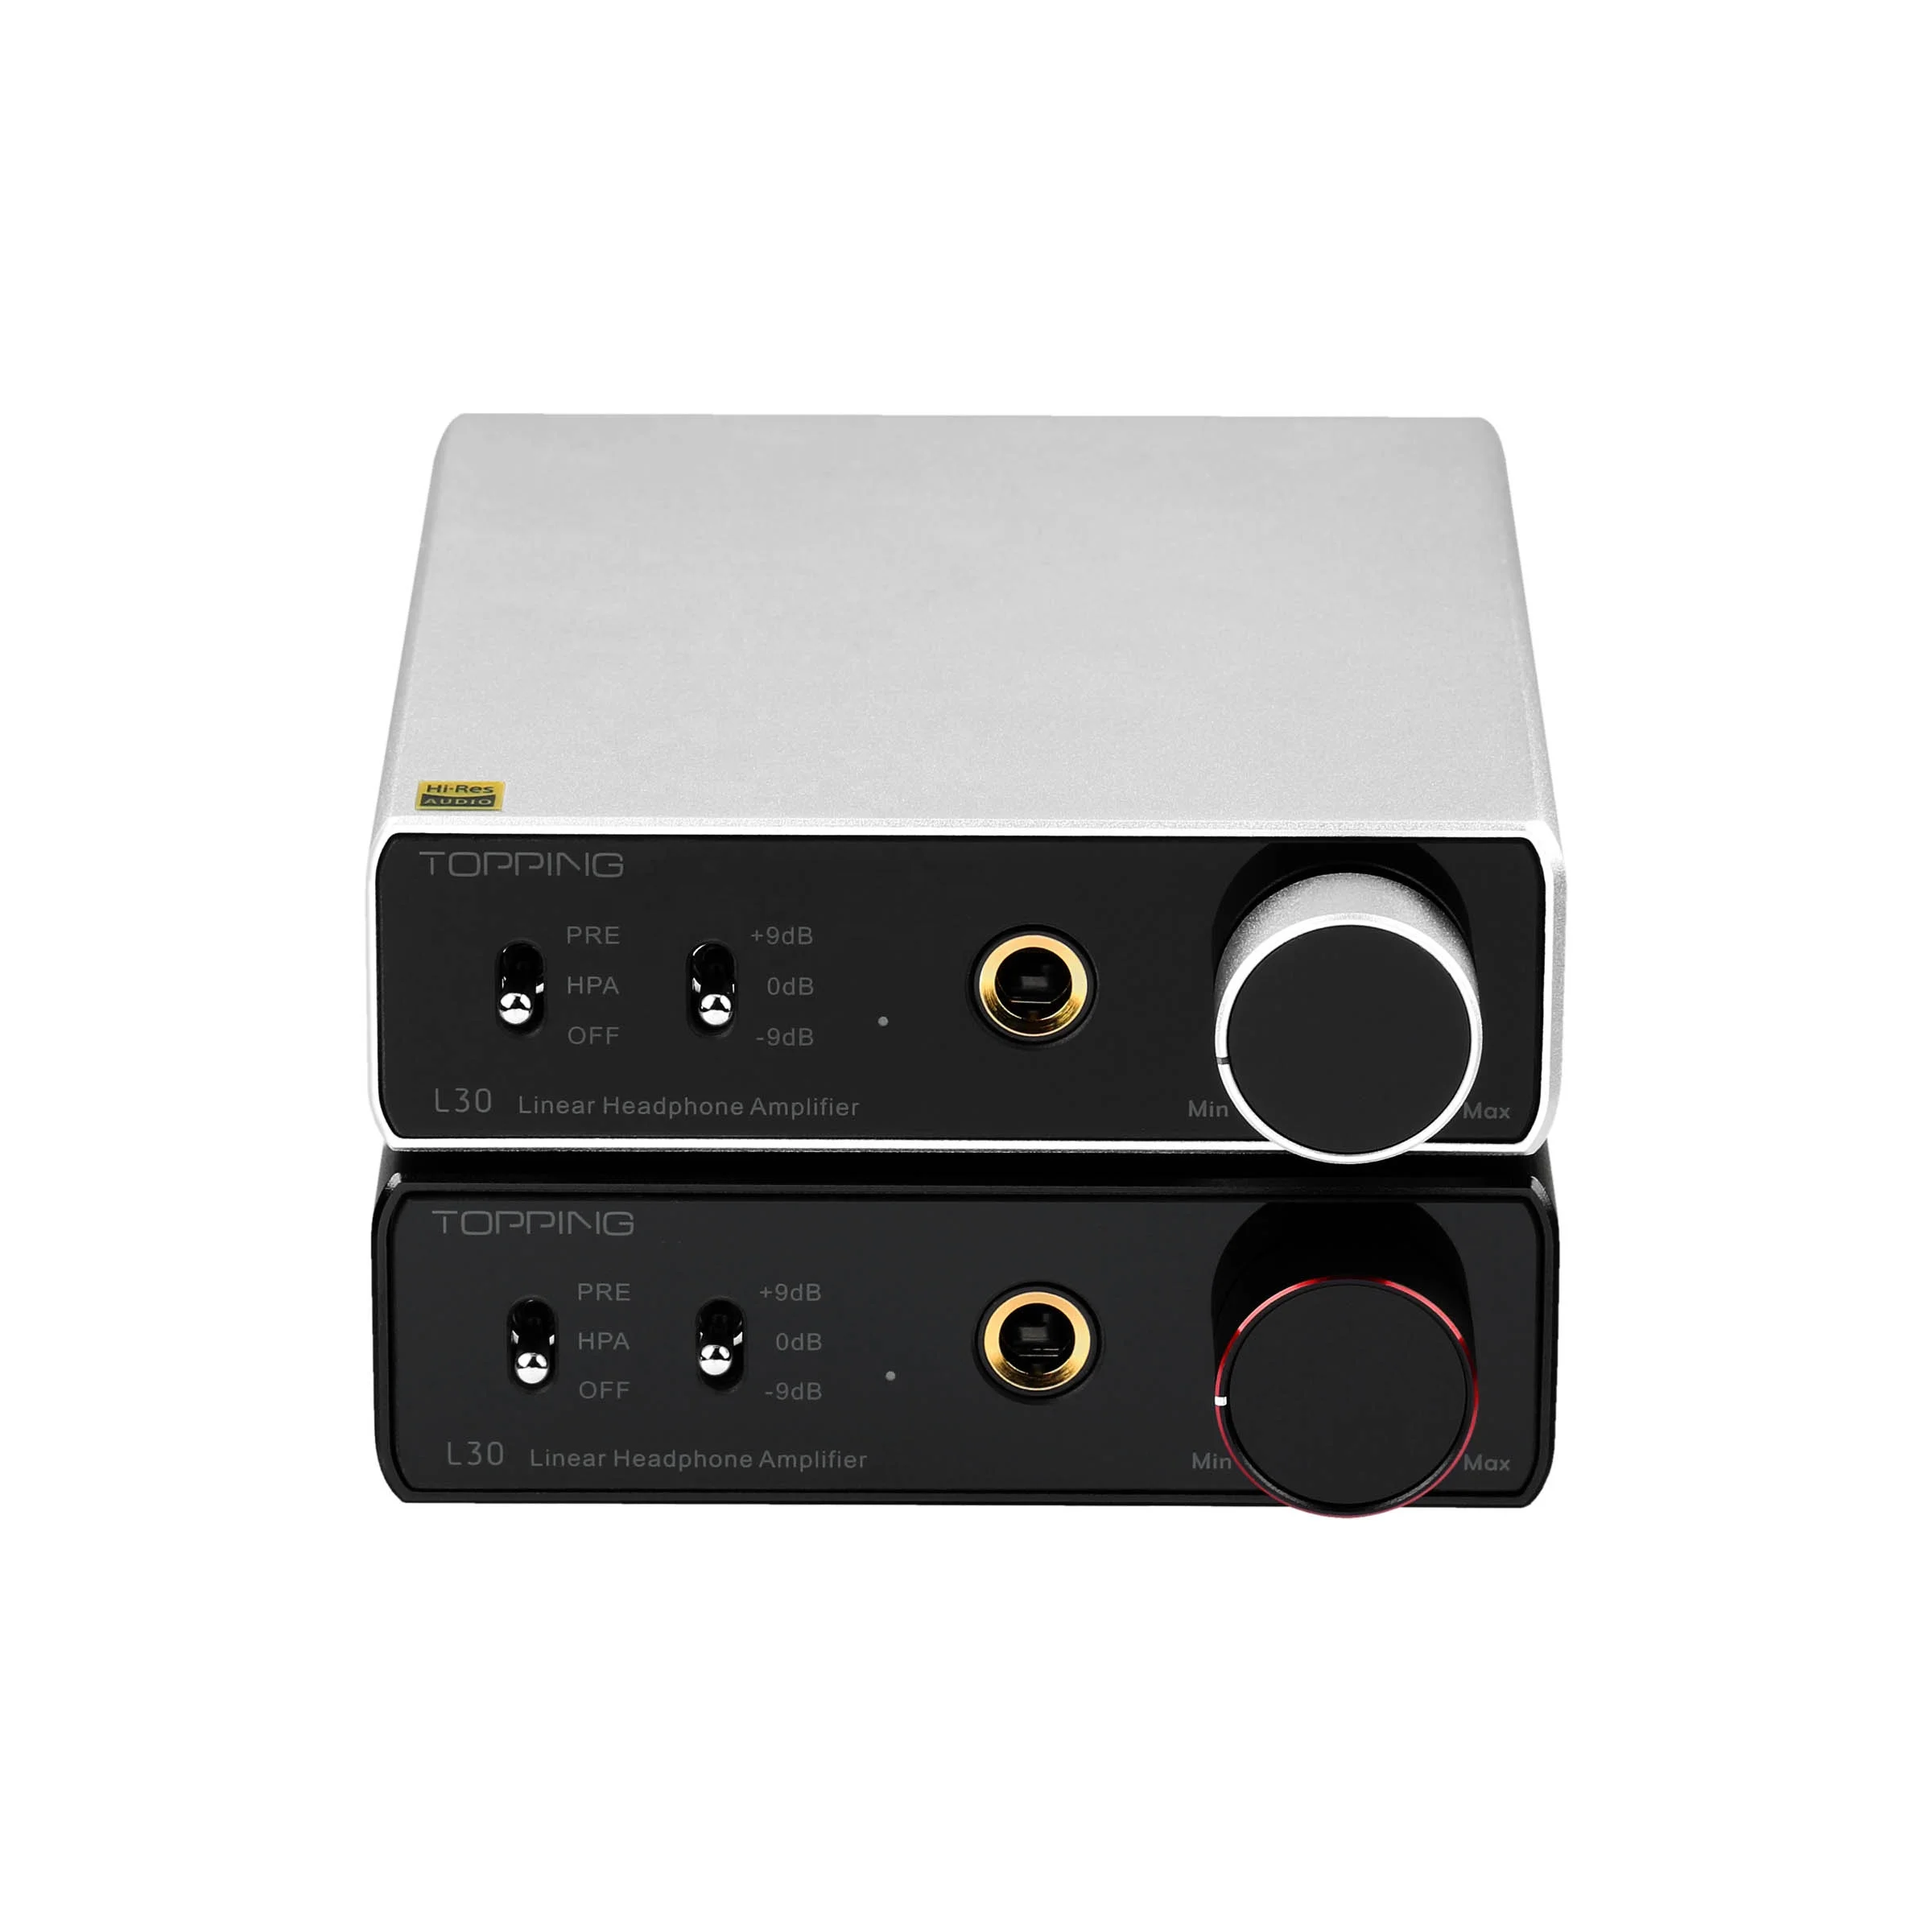 

TOPPING L30 Headphone Amplifier NFCA pre-amp preamplifier for E30 DAC